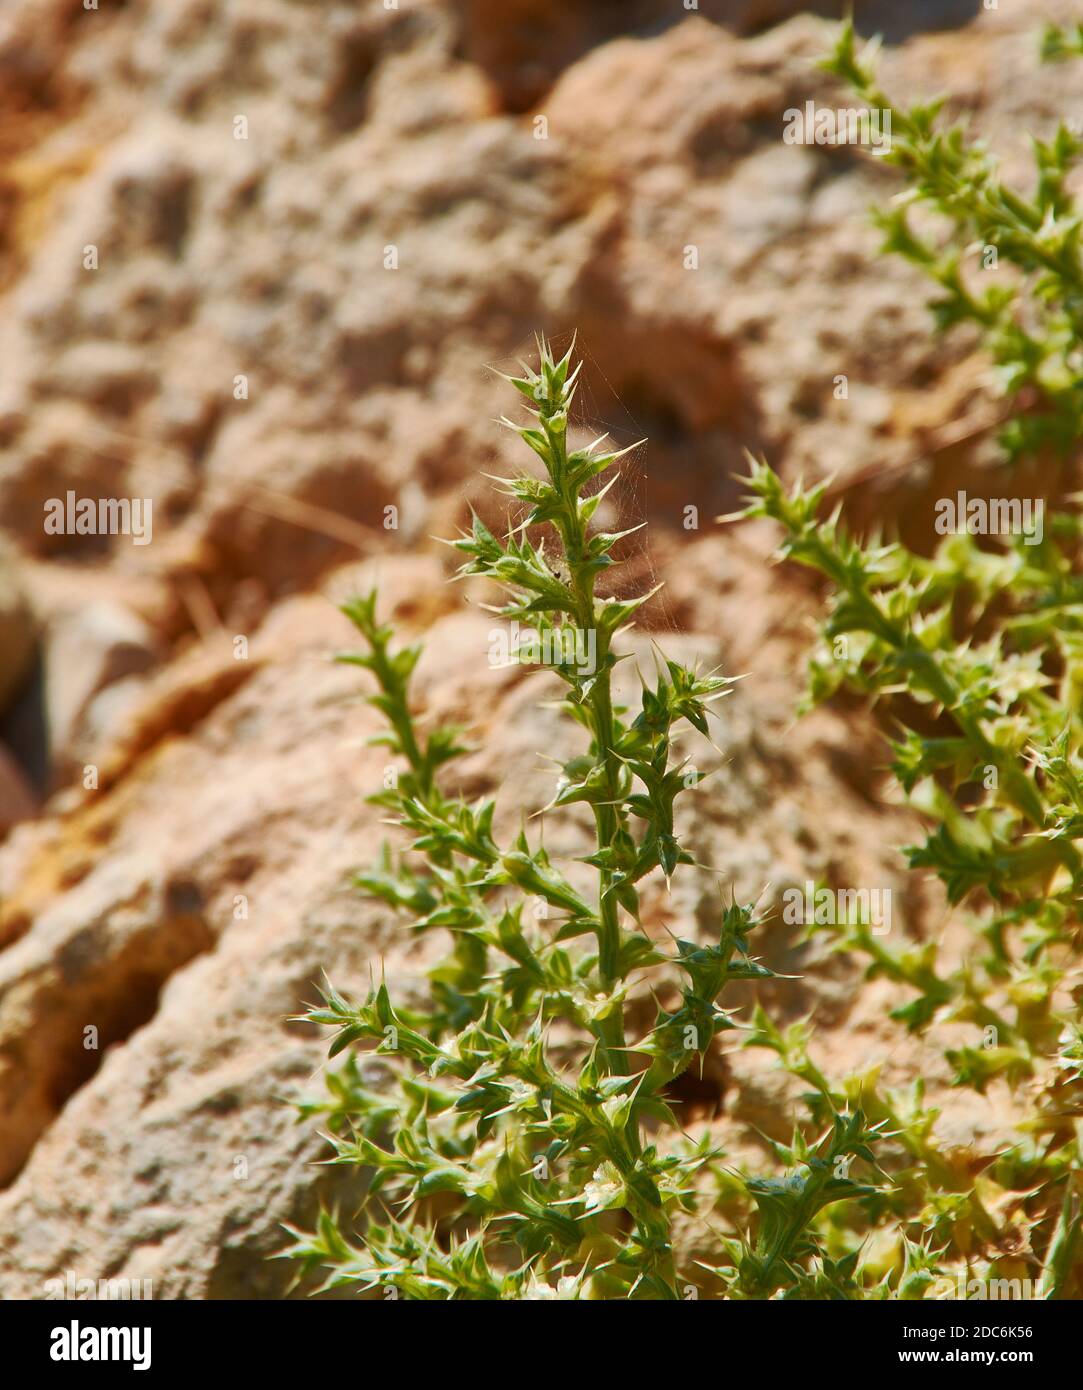 Salsola kali, Kali turgidum,  commonly known as prickly saltwort or prickly glasswort, is an annual plant that grows in salty sandy coastal soils. Stock Photo